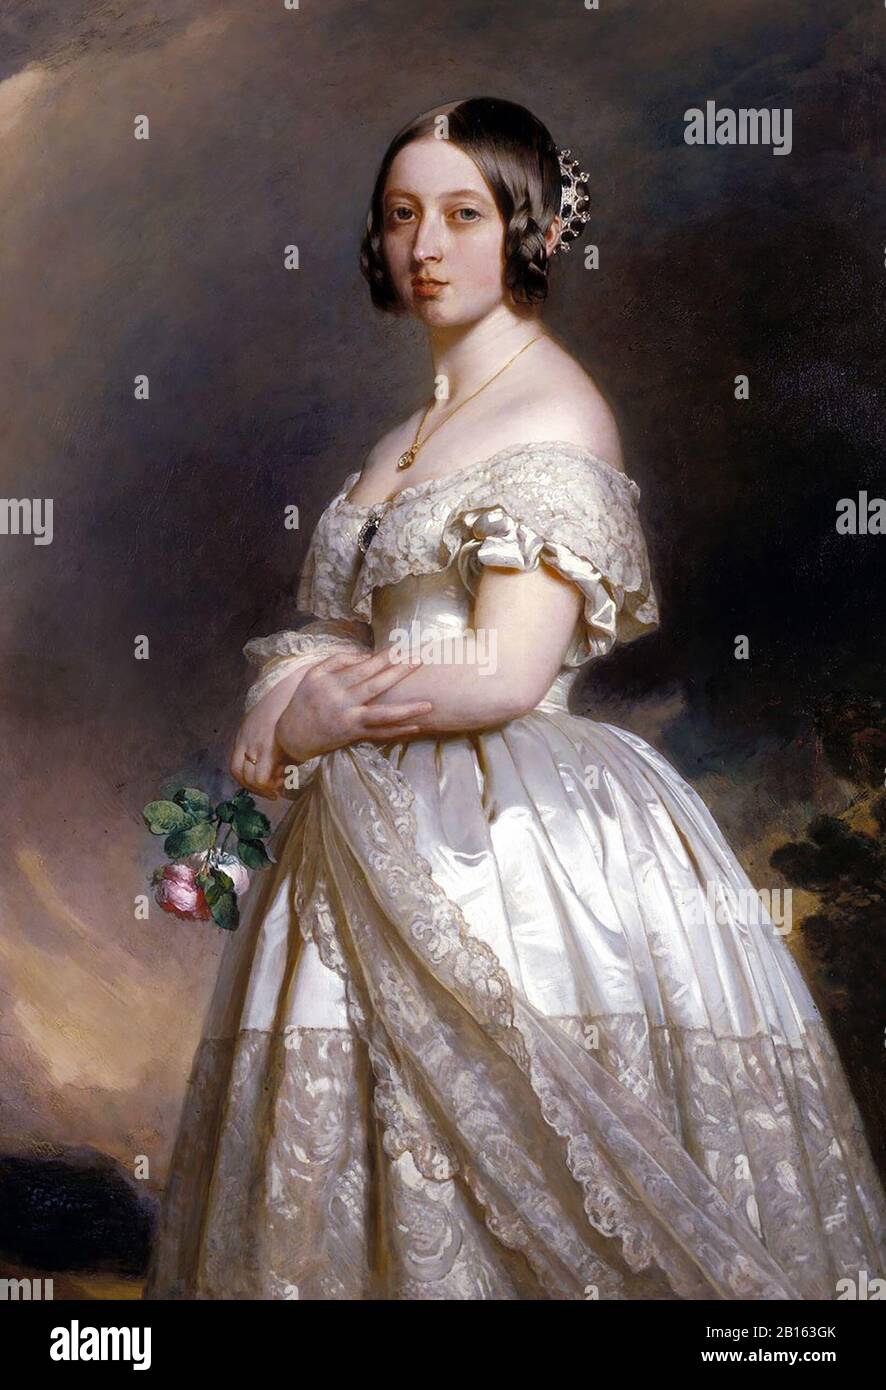 The Young Queen Victoria, 1842.  Queen Victoria was queen from 20 June 1837 until 22 January 1901. Stock Photo